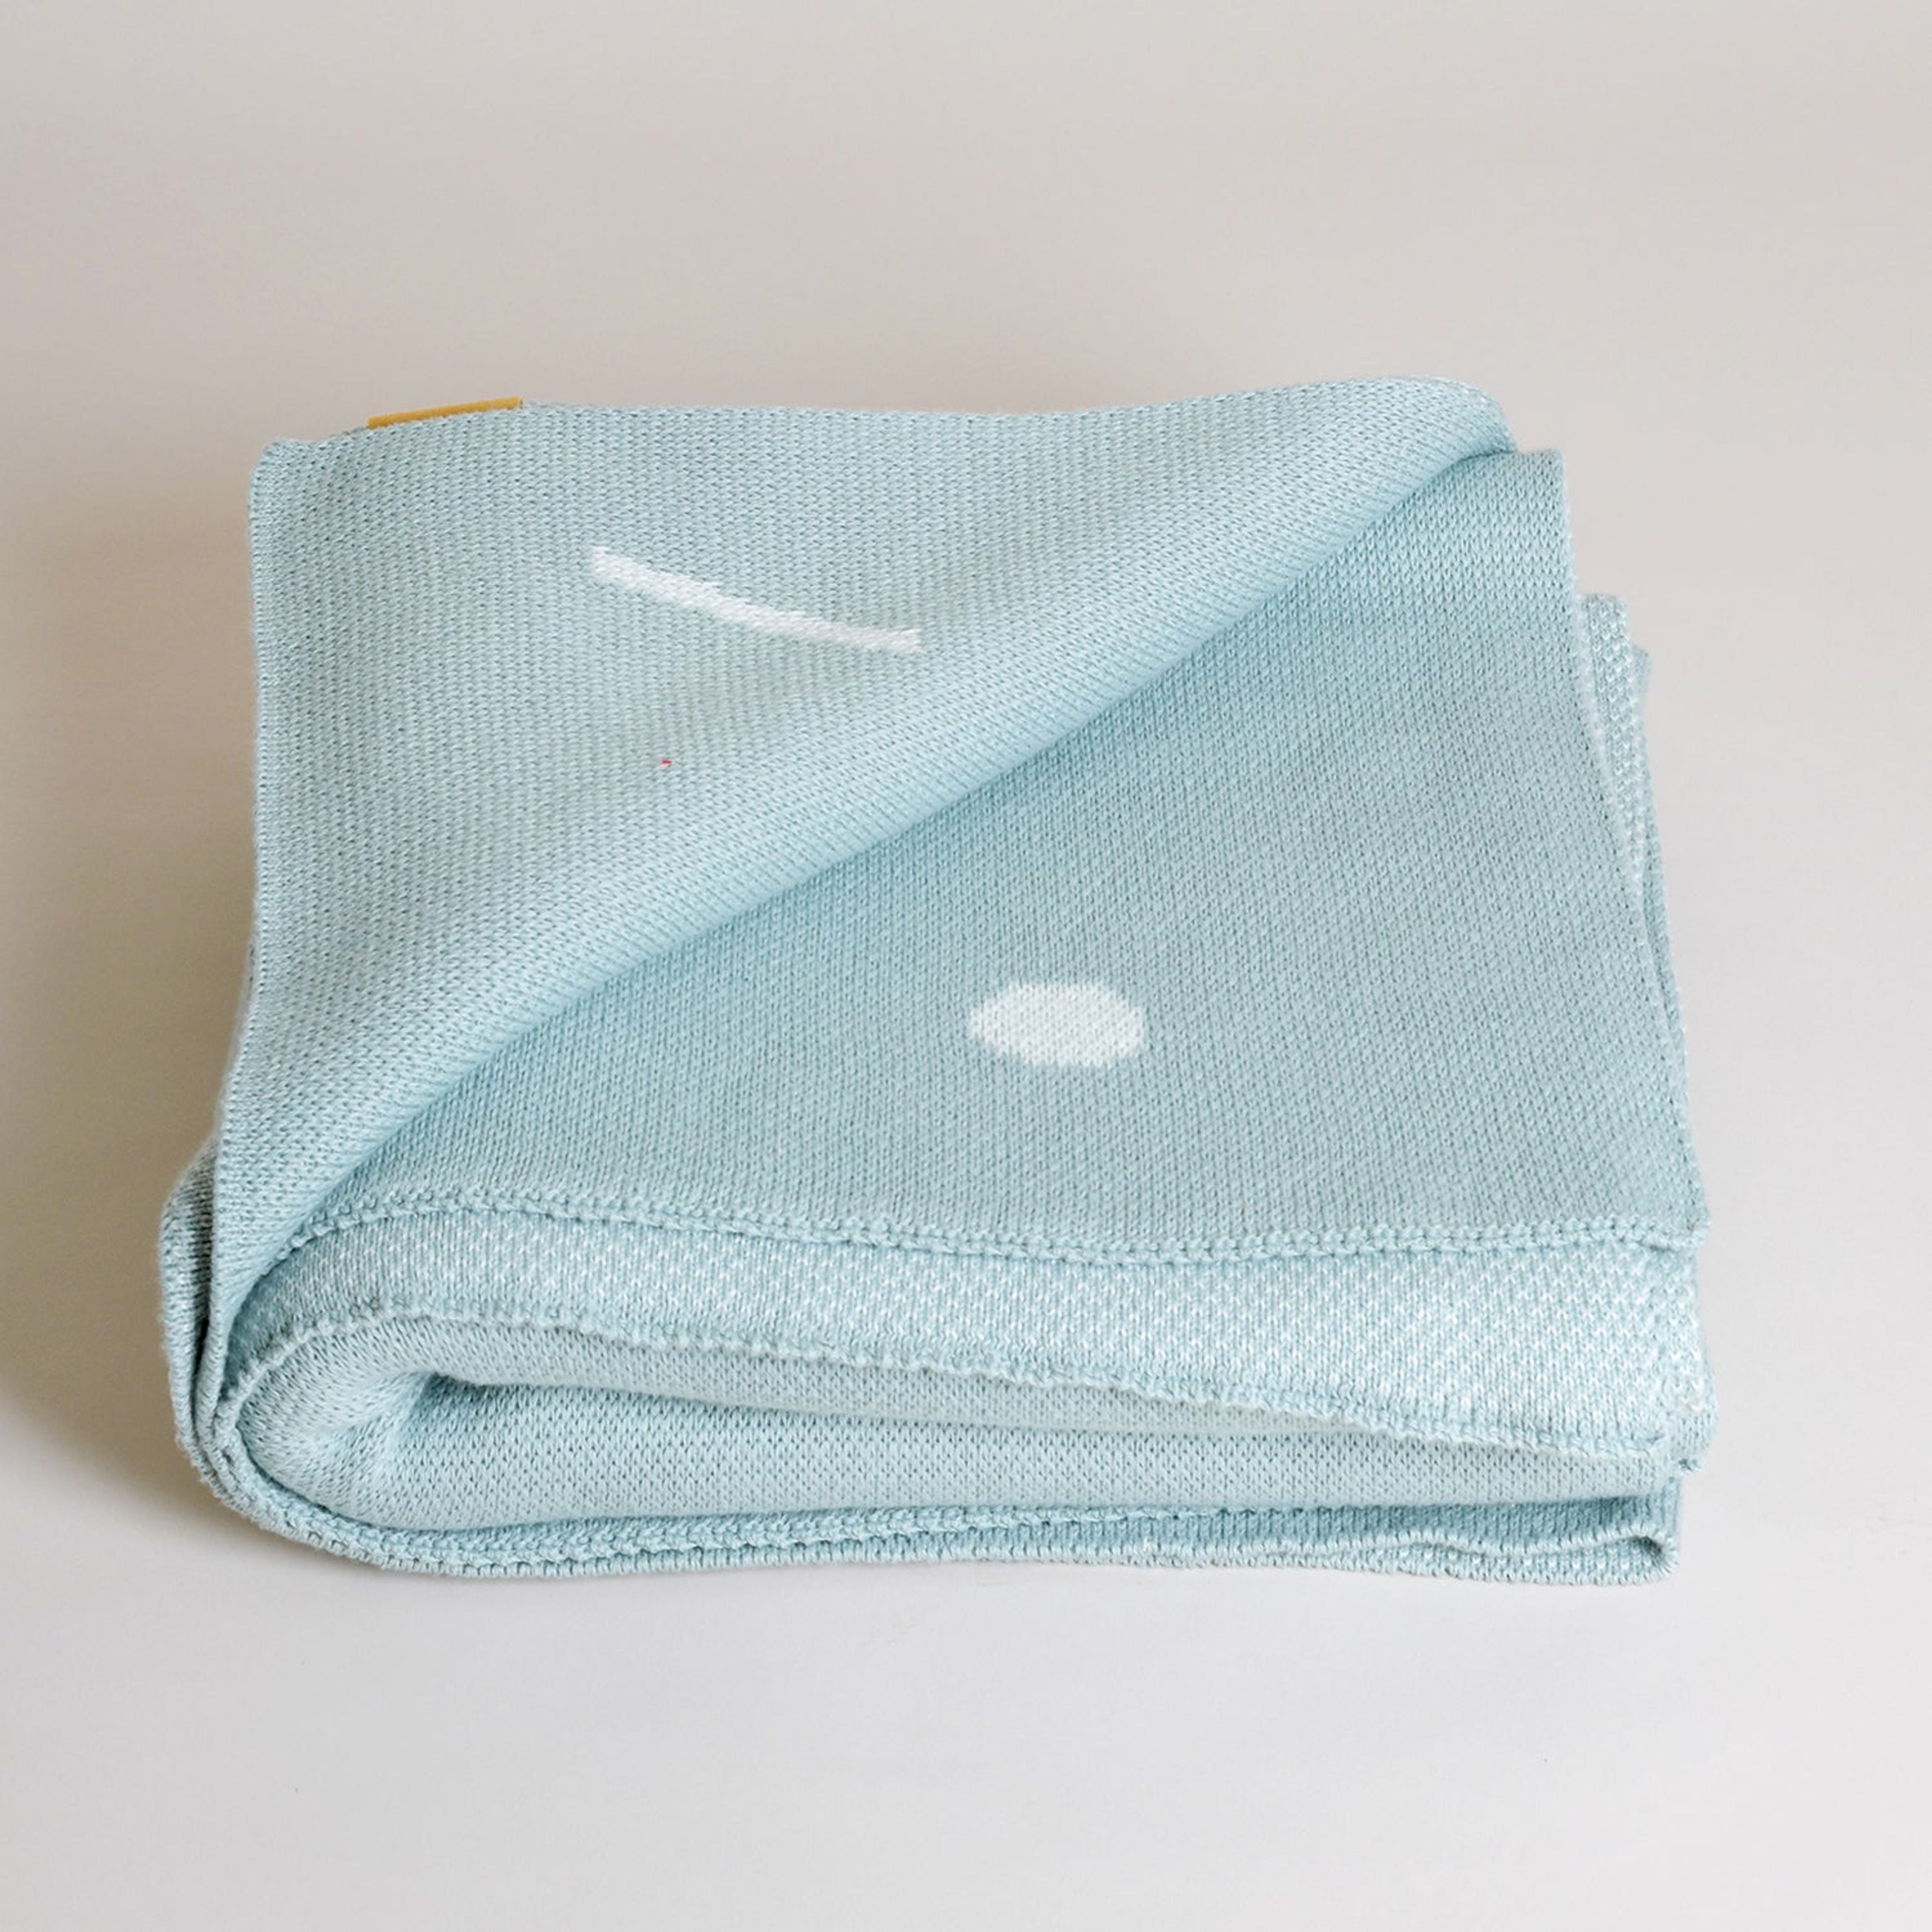 The Little Shapes Throw Blanket | Egyptian Cotton